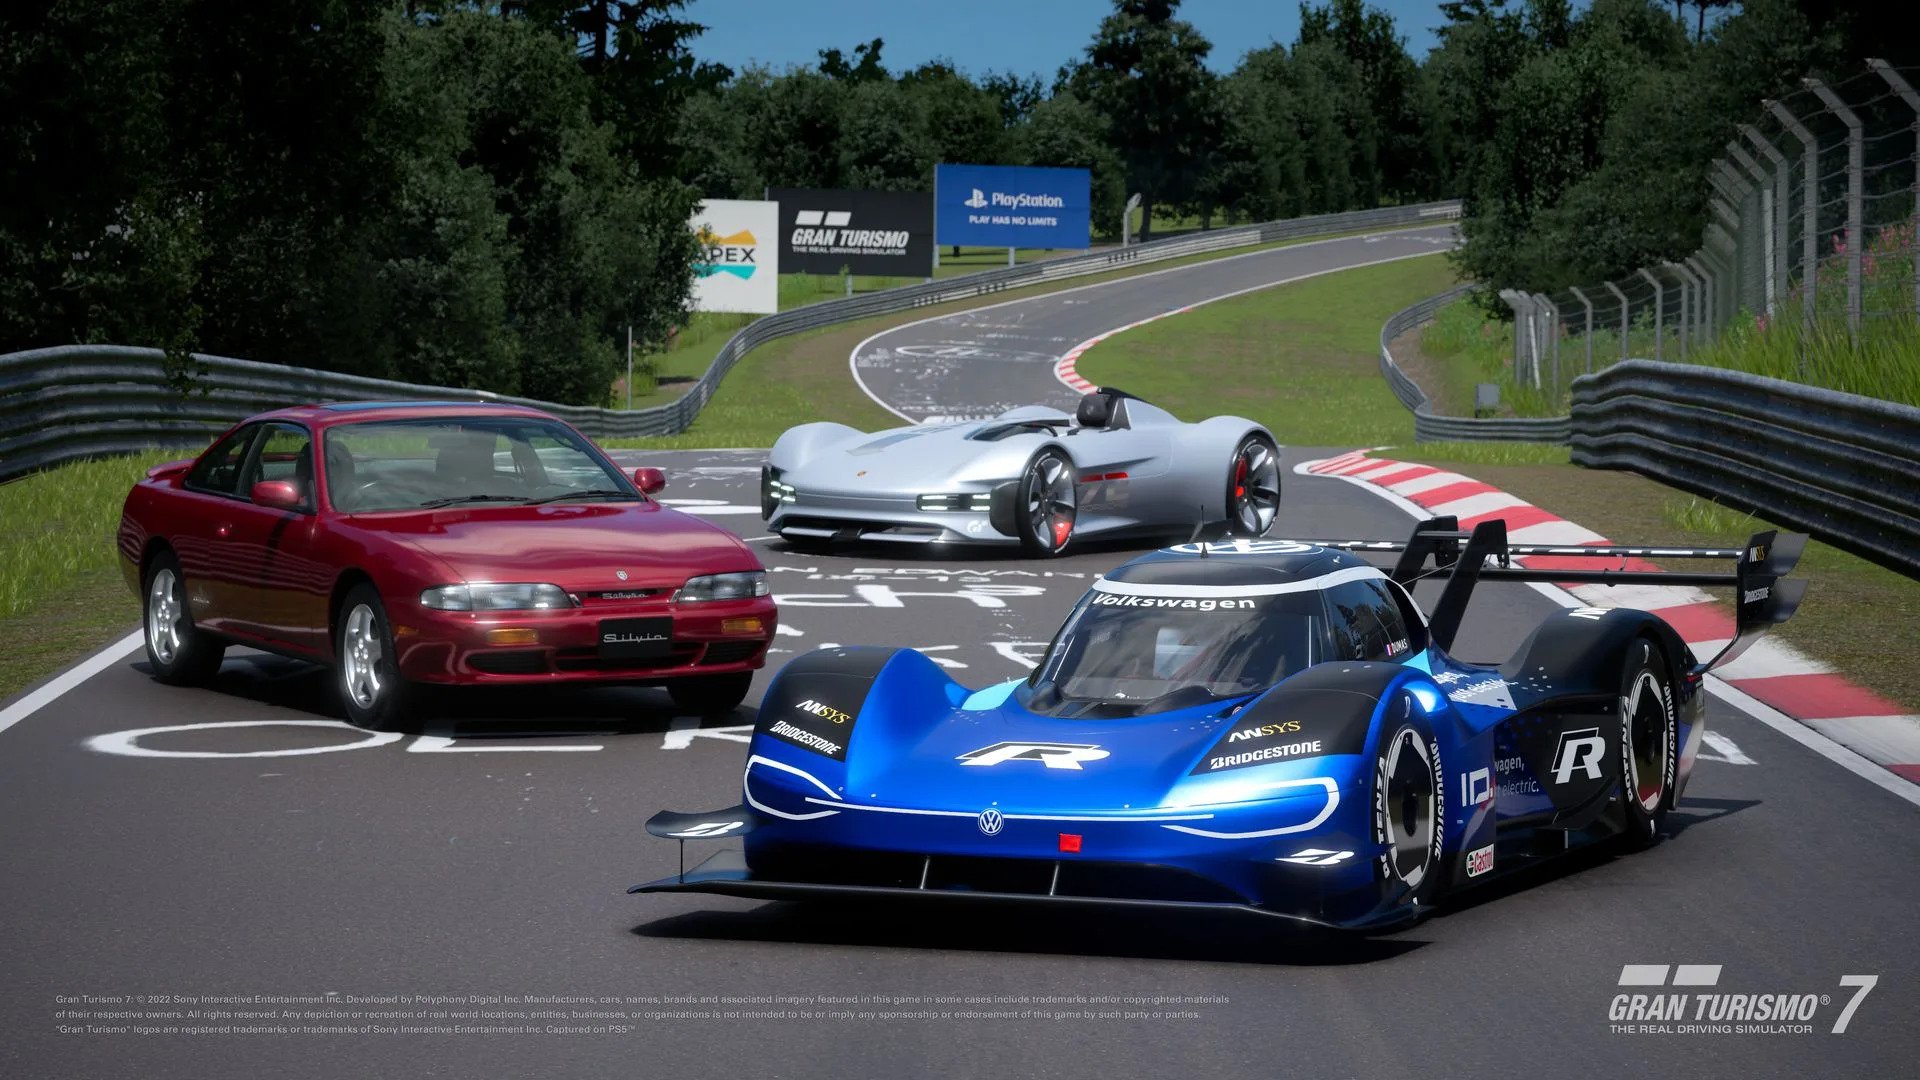 Gran Turismo 6 update adds new cars, tracks and game modes